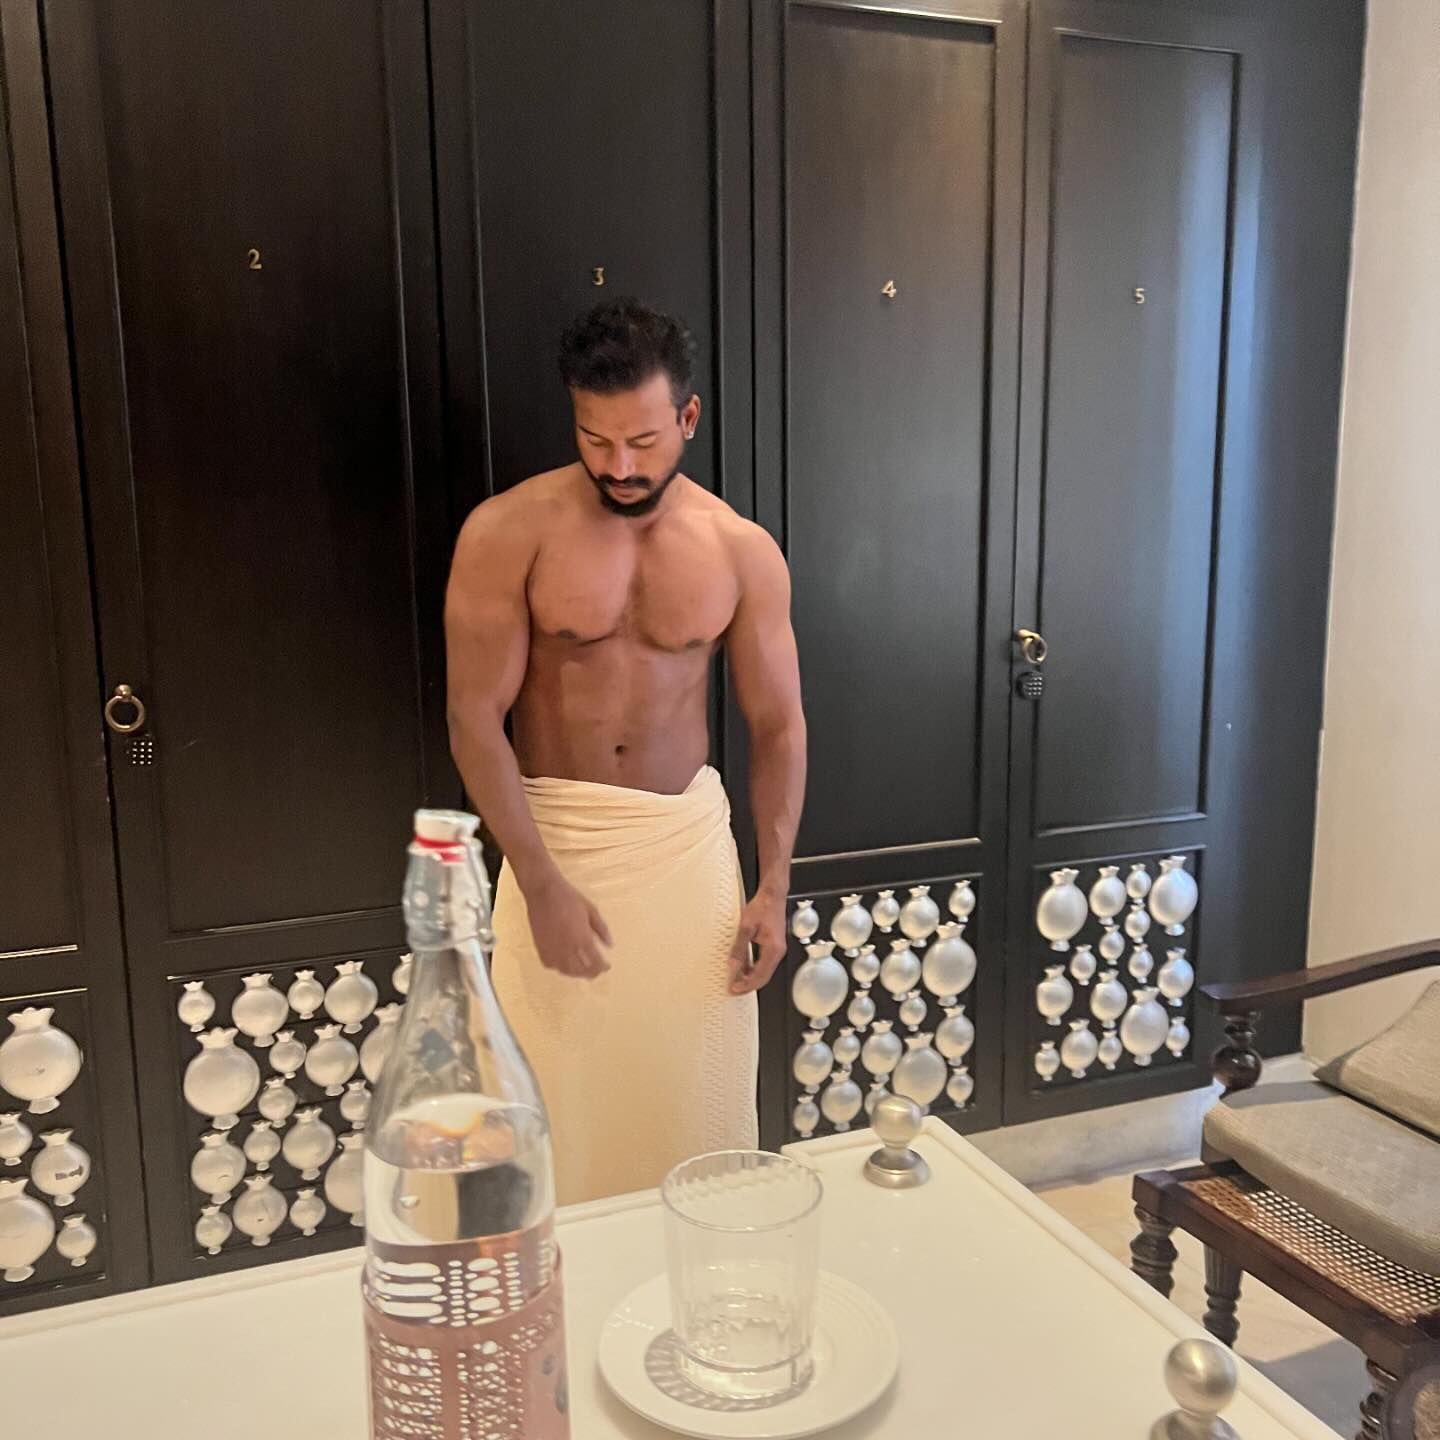 Too Hot Today Is 🥵🥵 Just Done shower 🙈😍✨
.
.
.
.
.
@raj.amen #fitnessmodel #lifestyle #fashionmodel #bold #shoot #naturephotography #indianmen #towel #oftheday